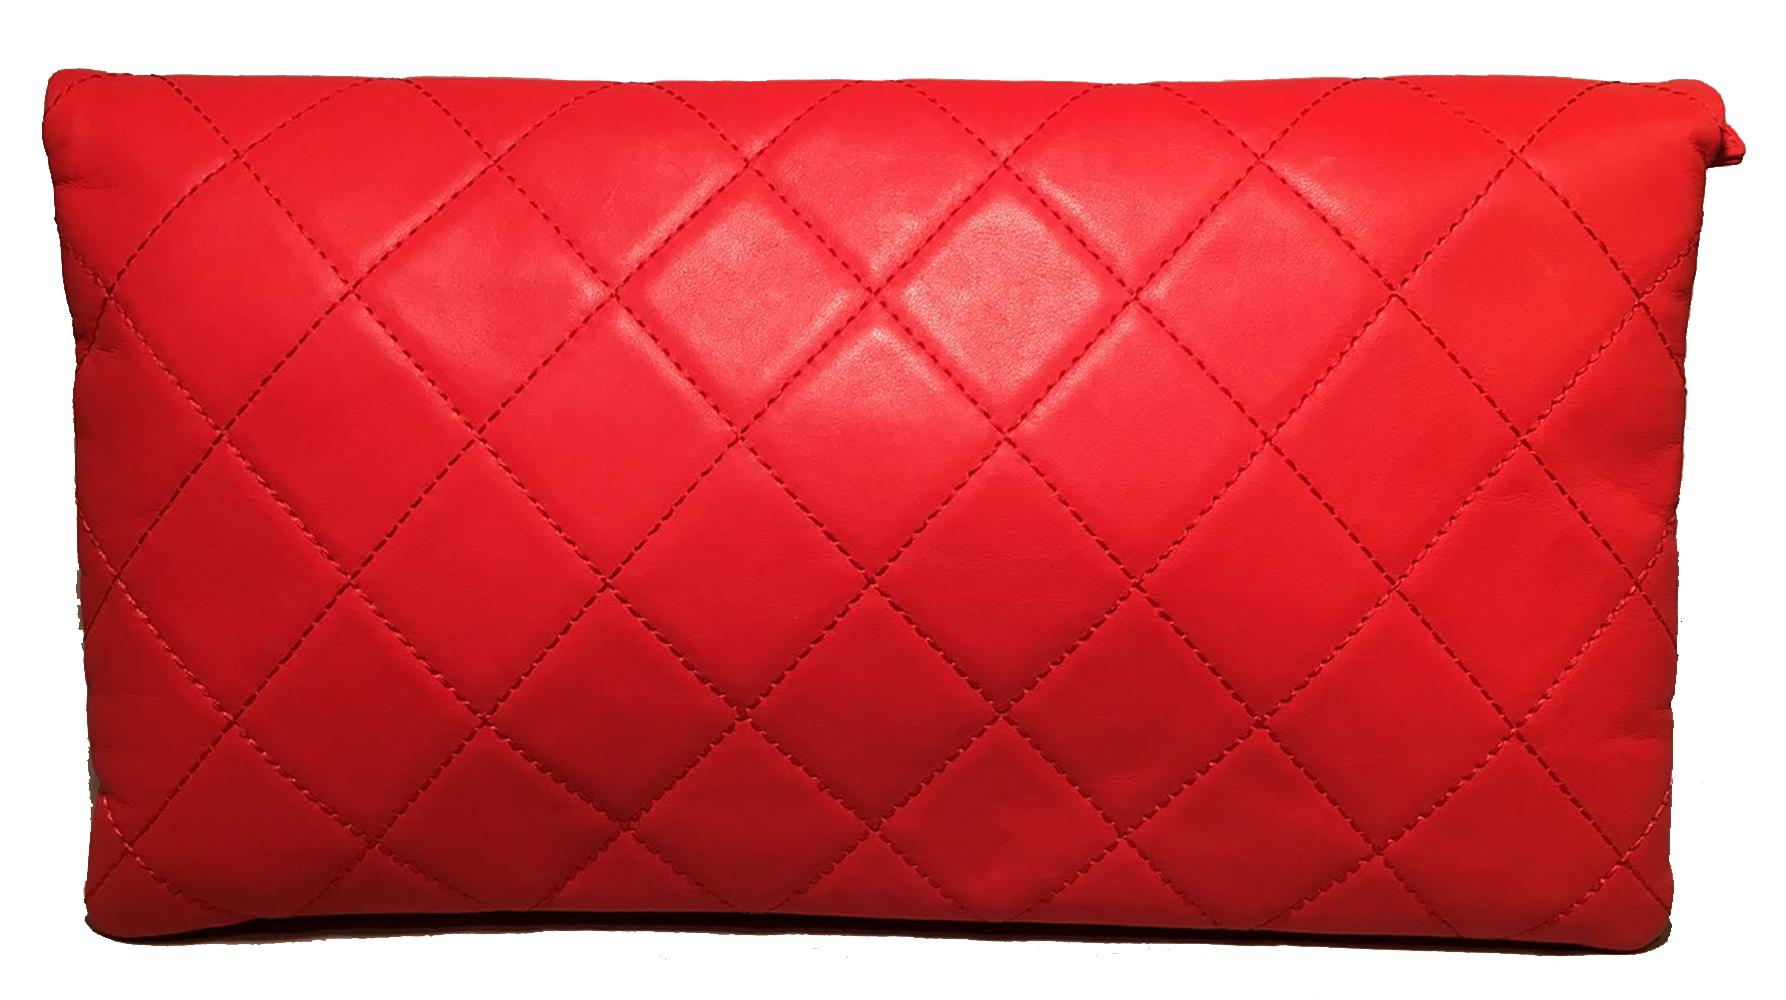 Chanel Red Quilted Leather CC Fold Over Clutch In Excellent Condition For Sale In Philadelphia, PA